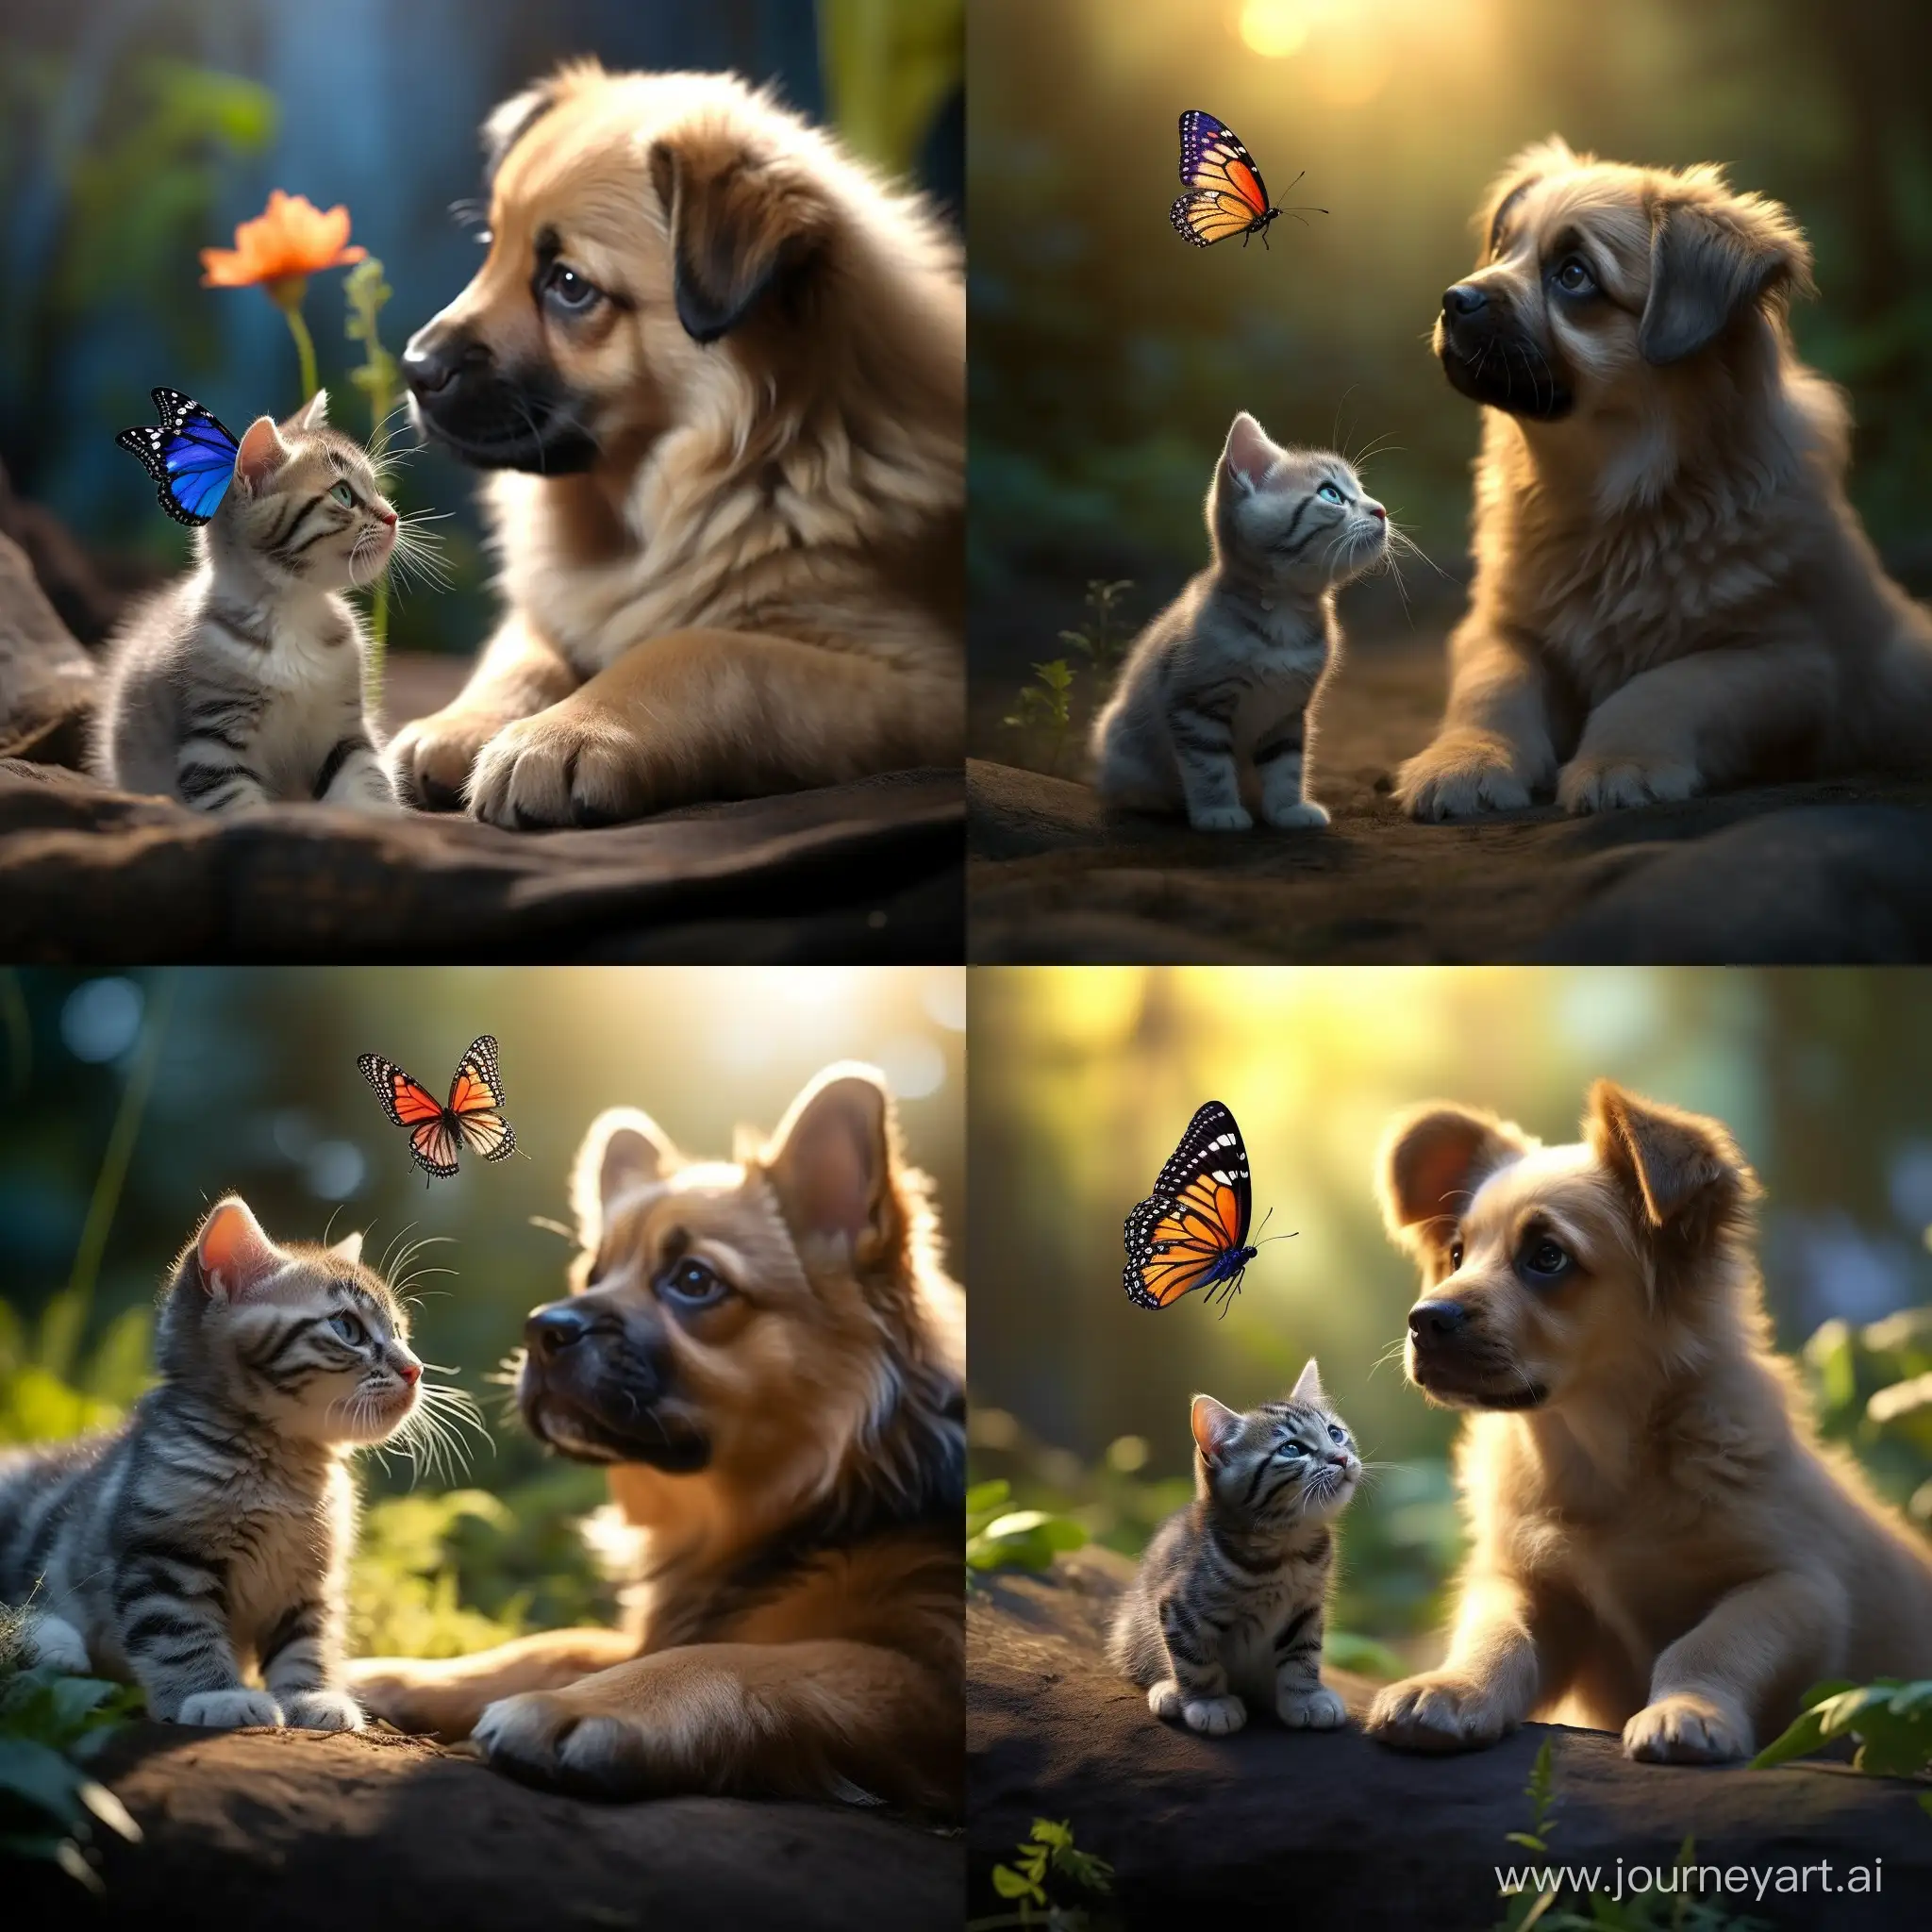 Adorable-Kitten-Sitting-on-Little-Dog-with-Butterfly-Realistic-4K-HD-Photo